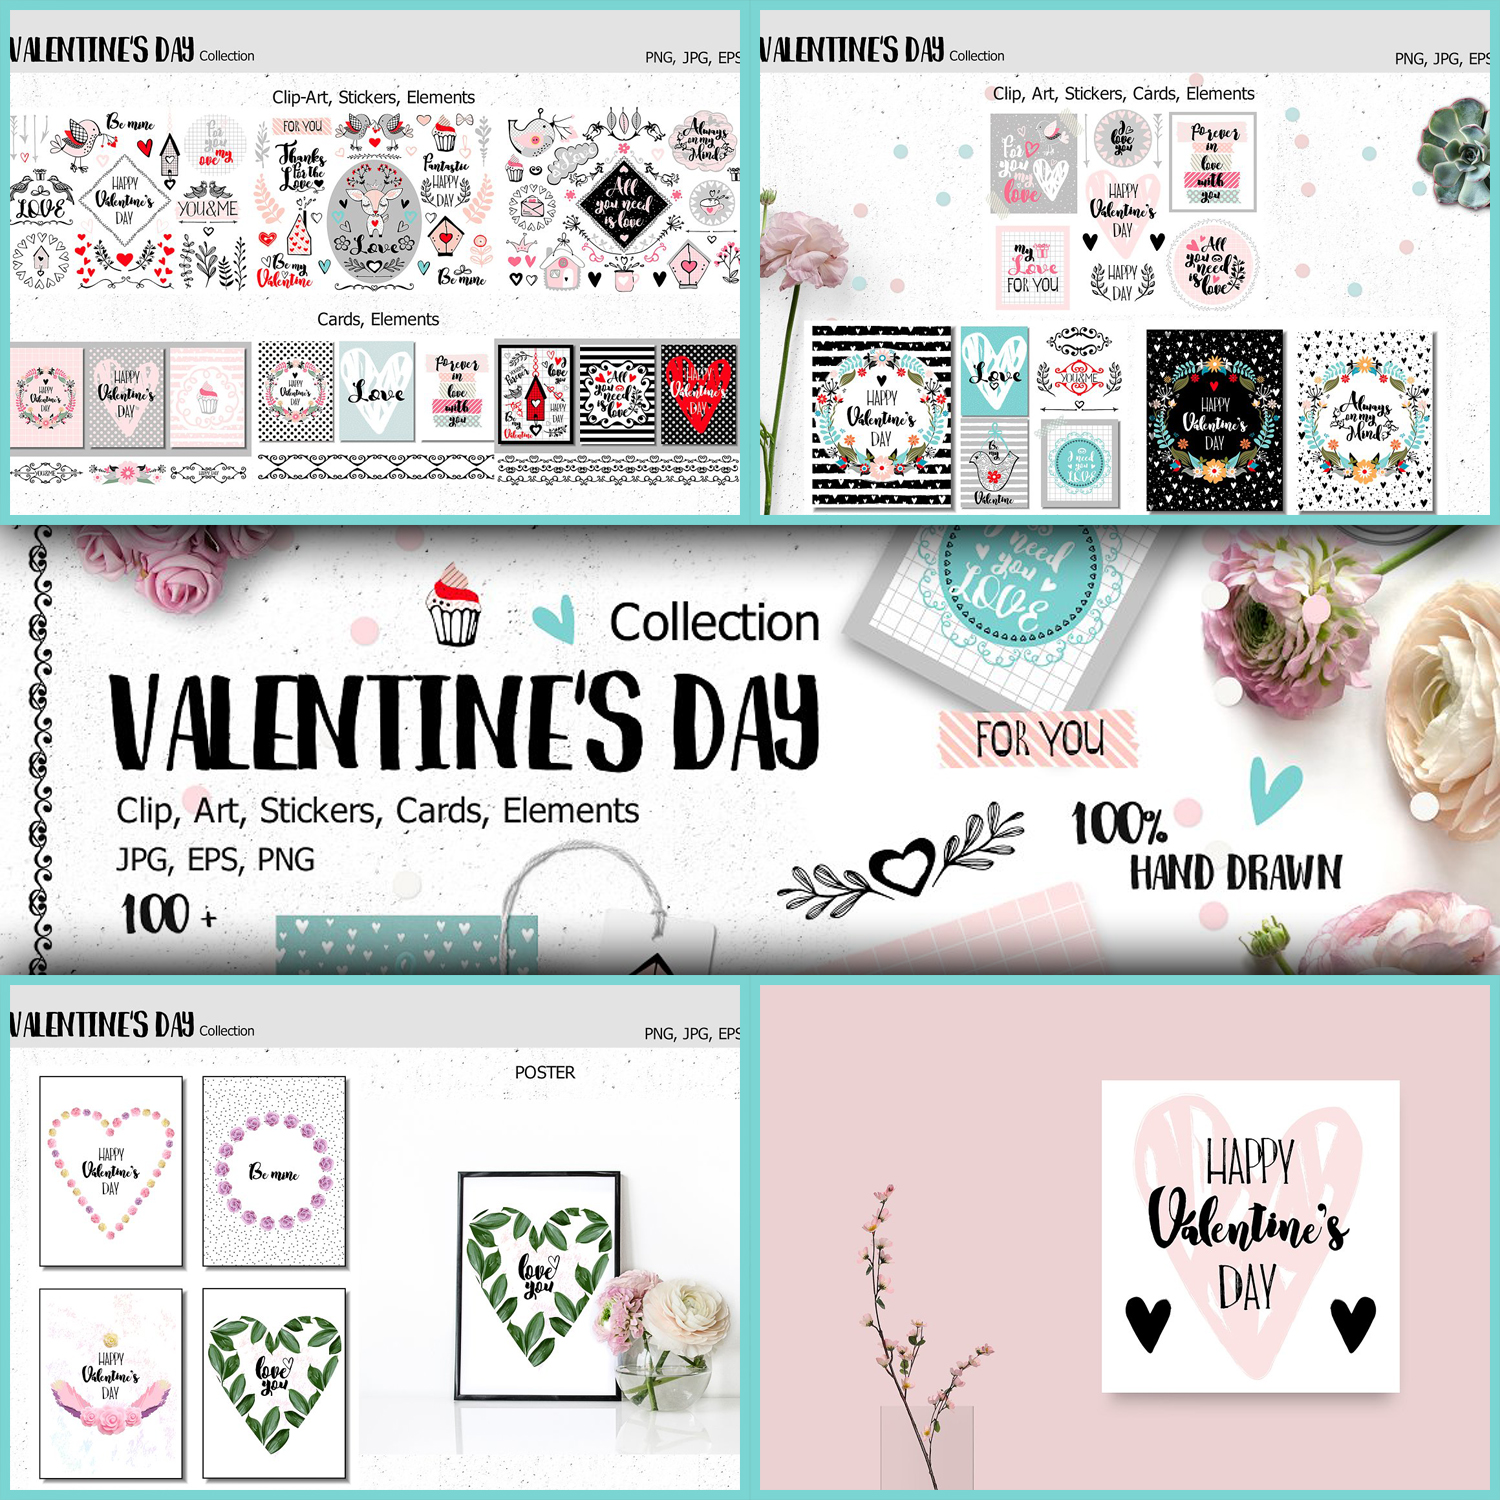 Preview valentines day elements cards.